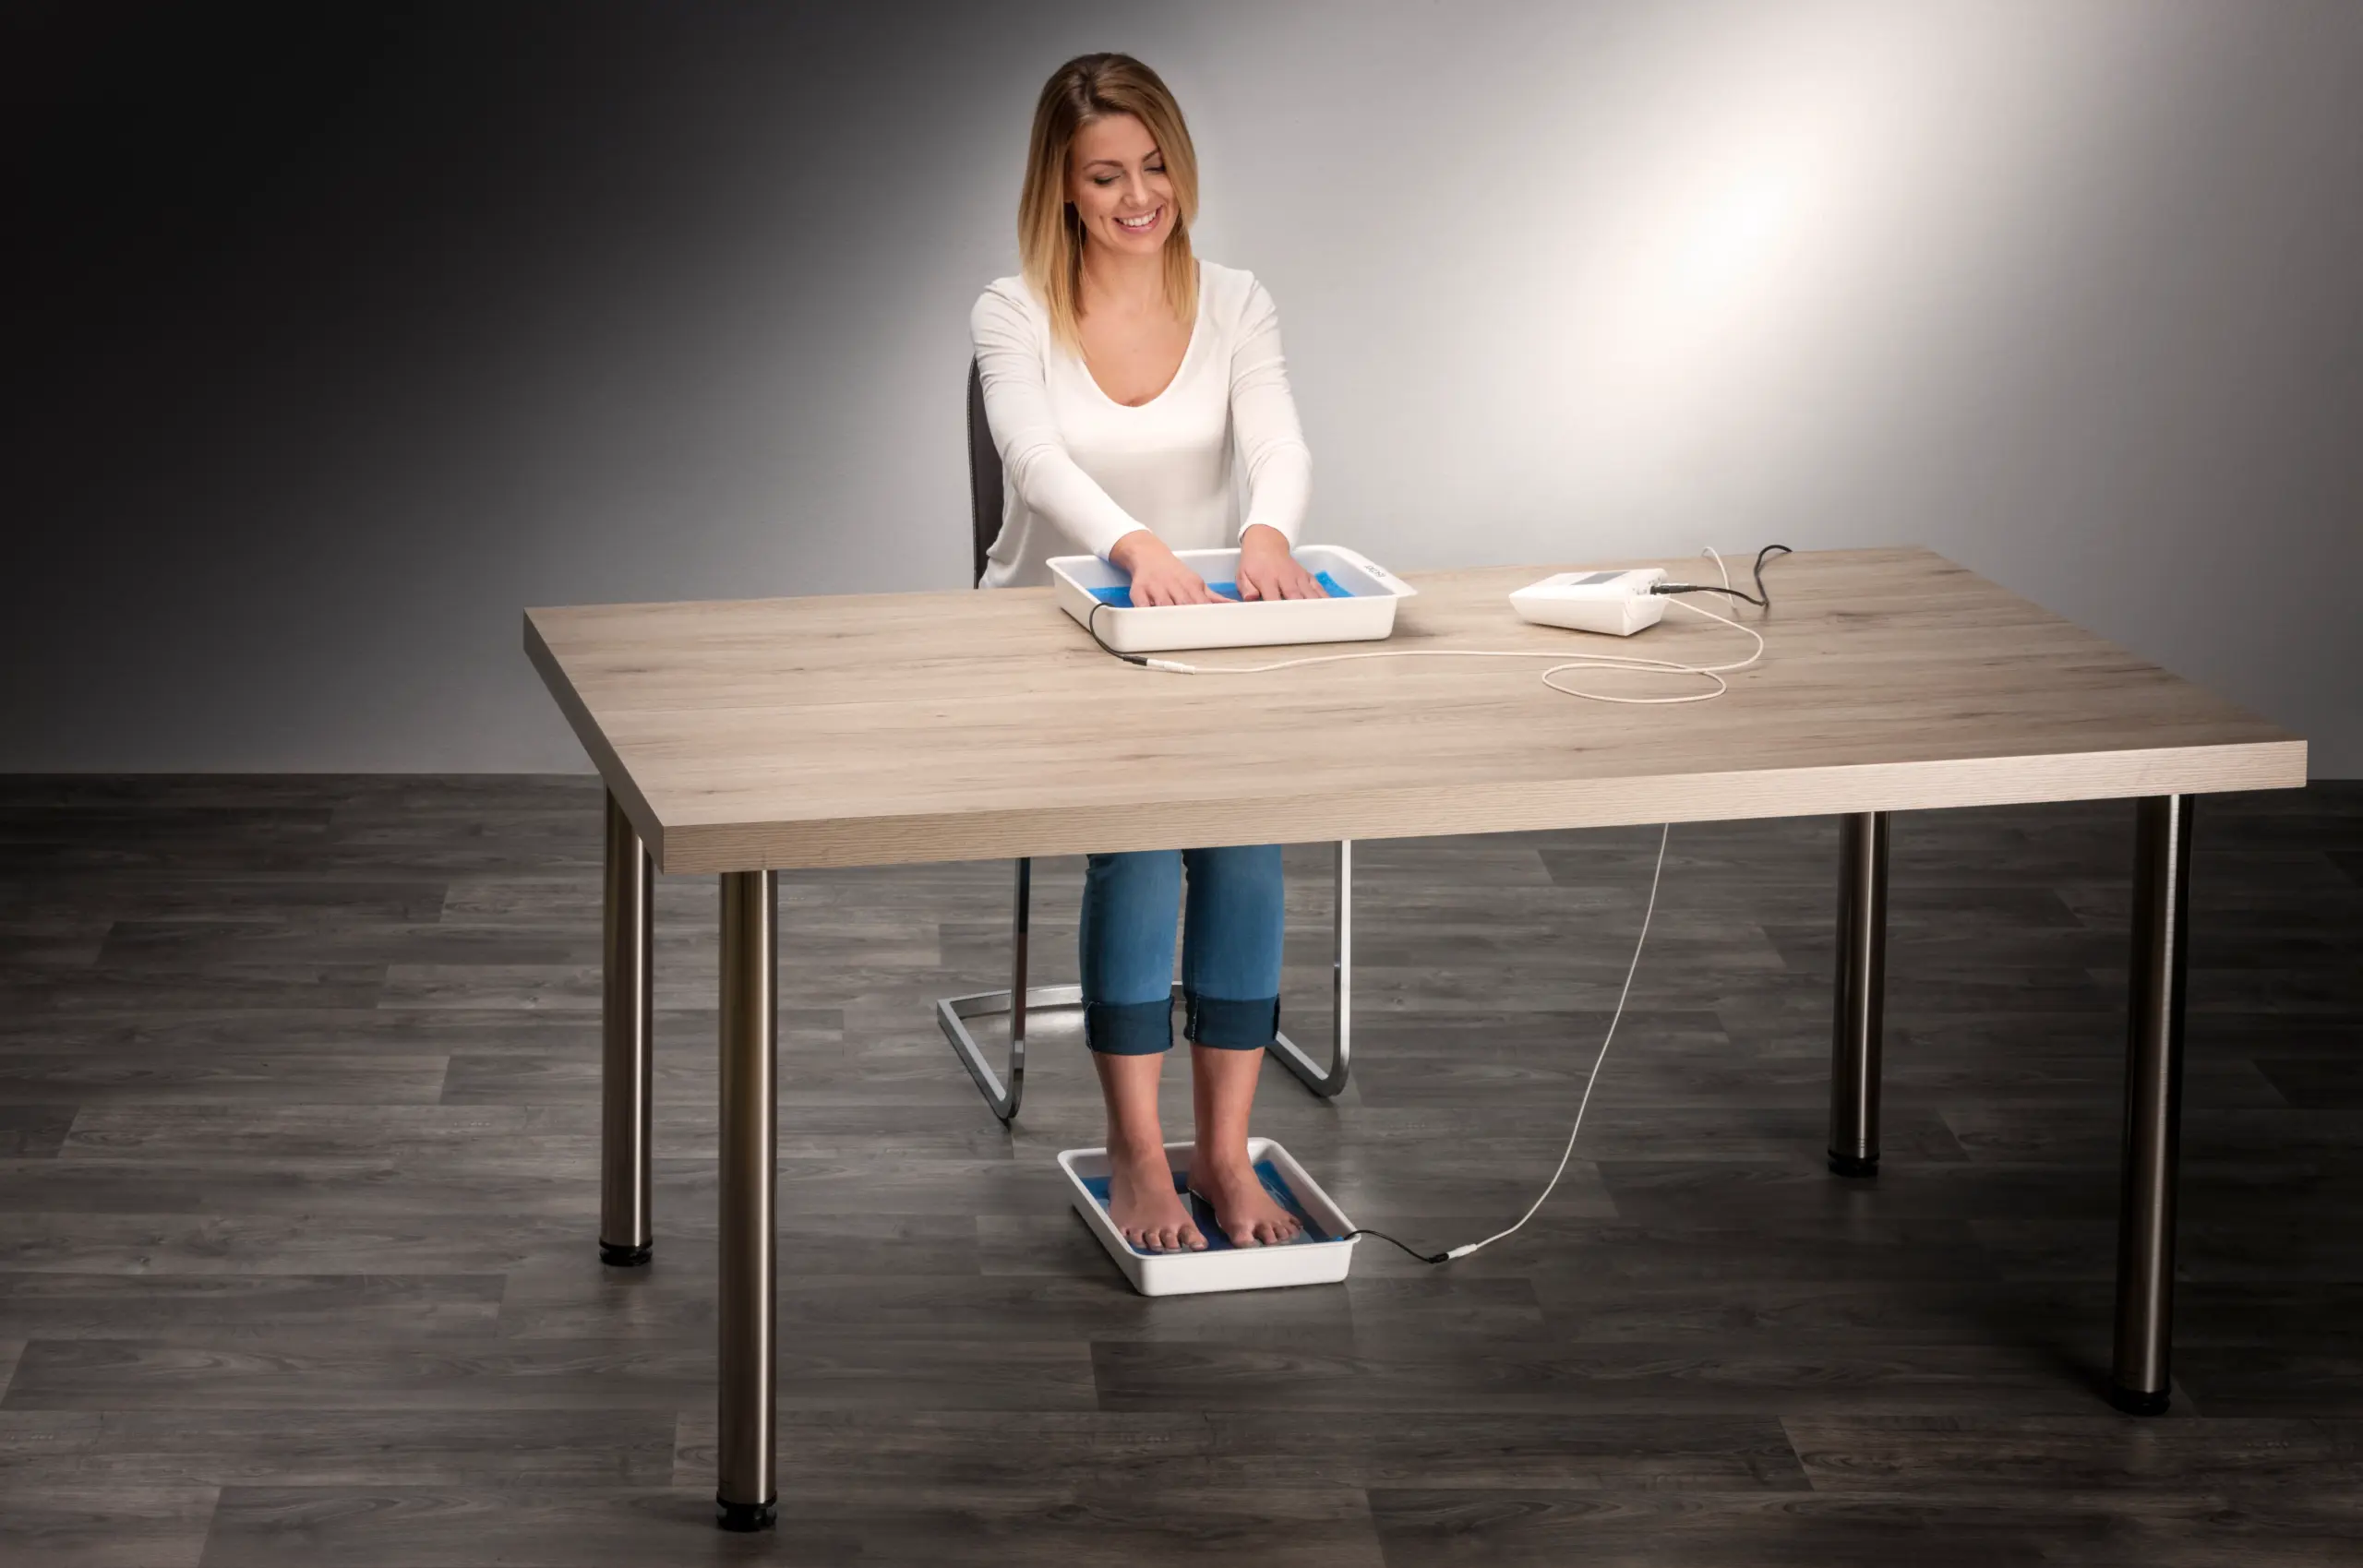 In this scene, we observe a woman elegantly attired in a white blouse and comfortably clad in jeans as she gracefully immerses her hands and feet into the water bath trays of the Fischer iontophoresis device, thoughtfully designed to offer relief from the burdensome challenges of palmar hyperhidrosis (excessive hand sweating) and plantar hyperhidrosis (excessive foot sweating). The Fischer iontophoresis device, proudly crafted by RA Fischer Co., stands out as an innovative solution, as it seamlessly allows for the concurrent treatment of both hands and feet, underscoring its effectiveness and convenience in addressing these perspiration-related concerns. This cutting-edge technology represents a significant step towards enhancing the quality of life for individuals dealing with hyperhidrosis.